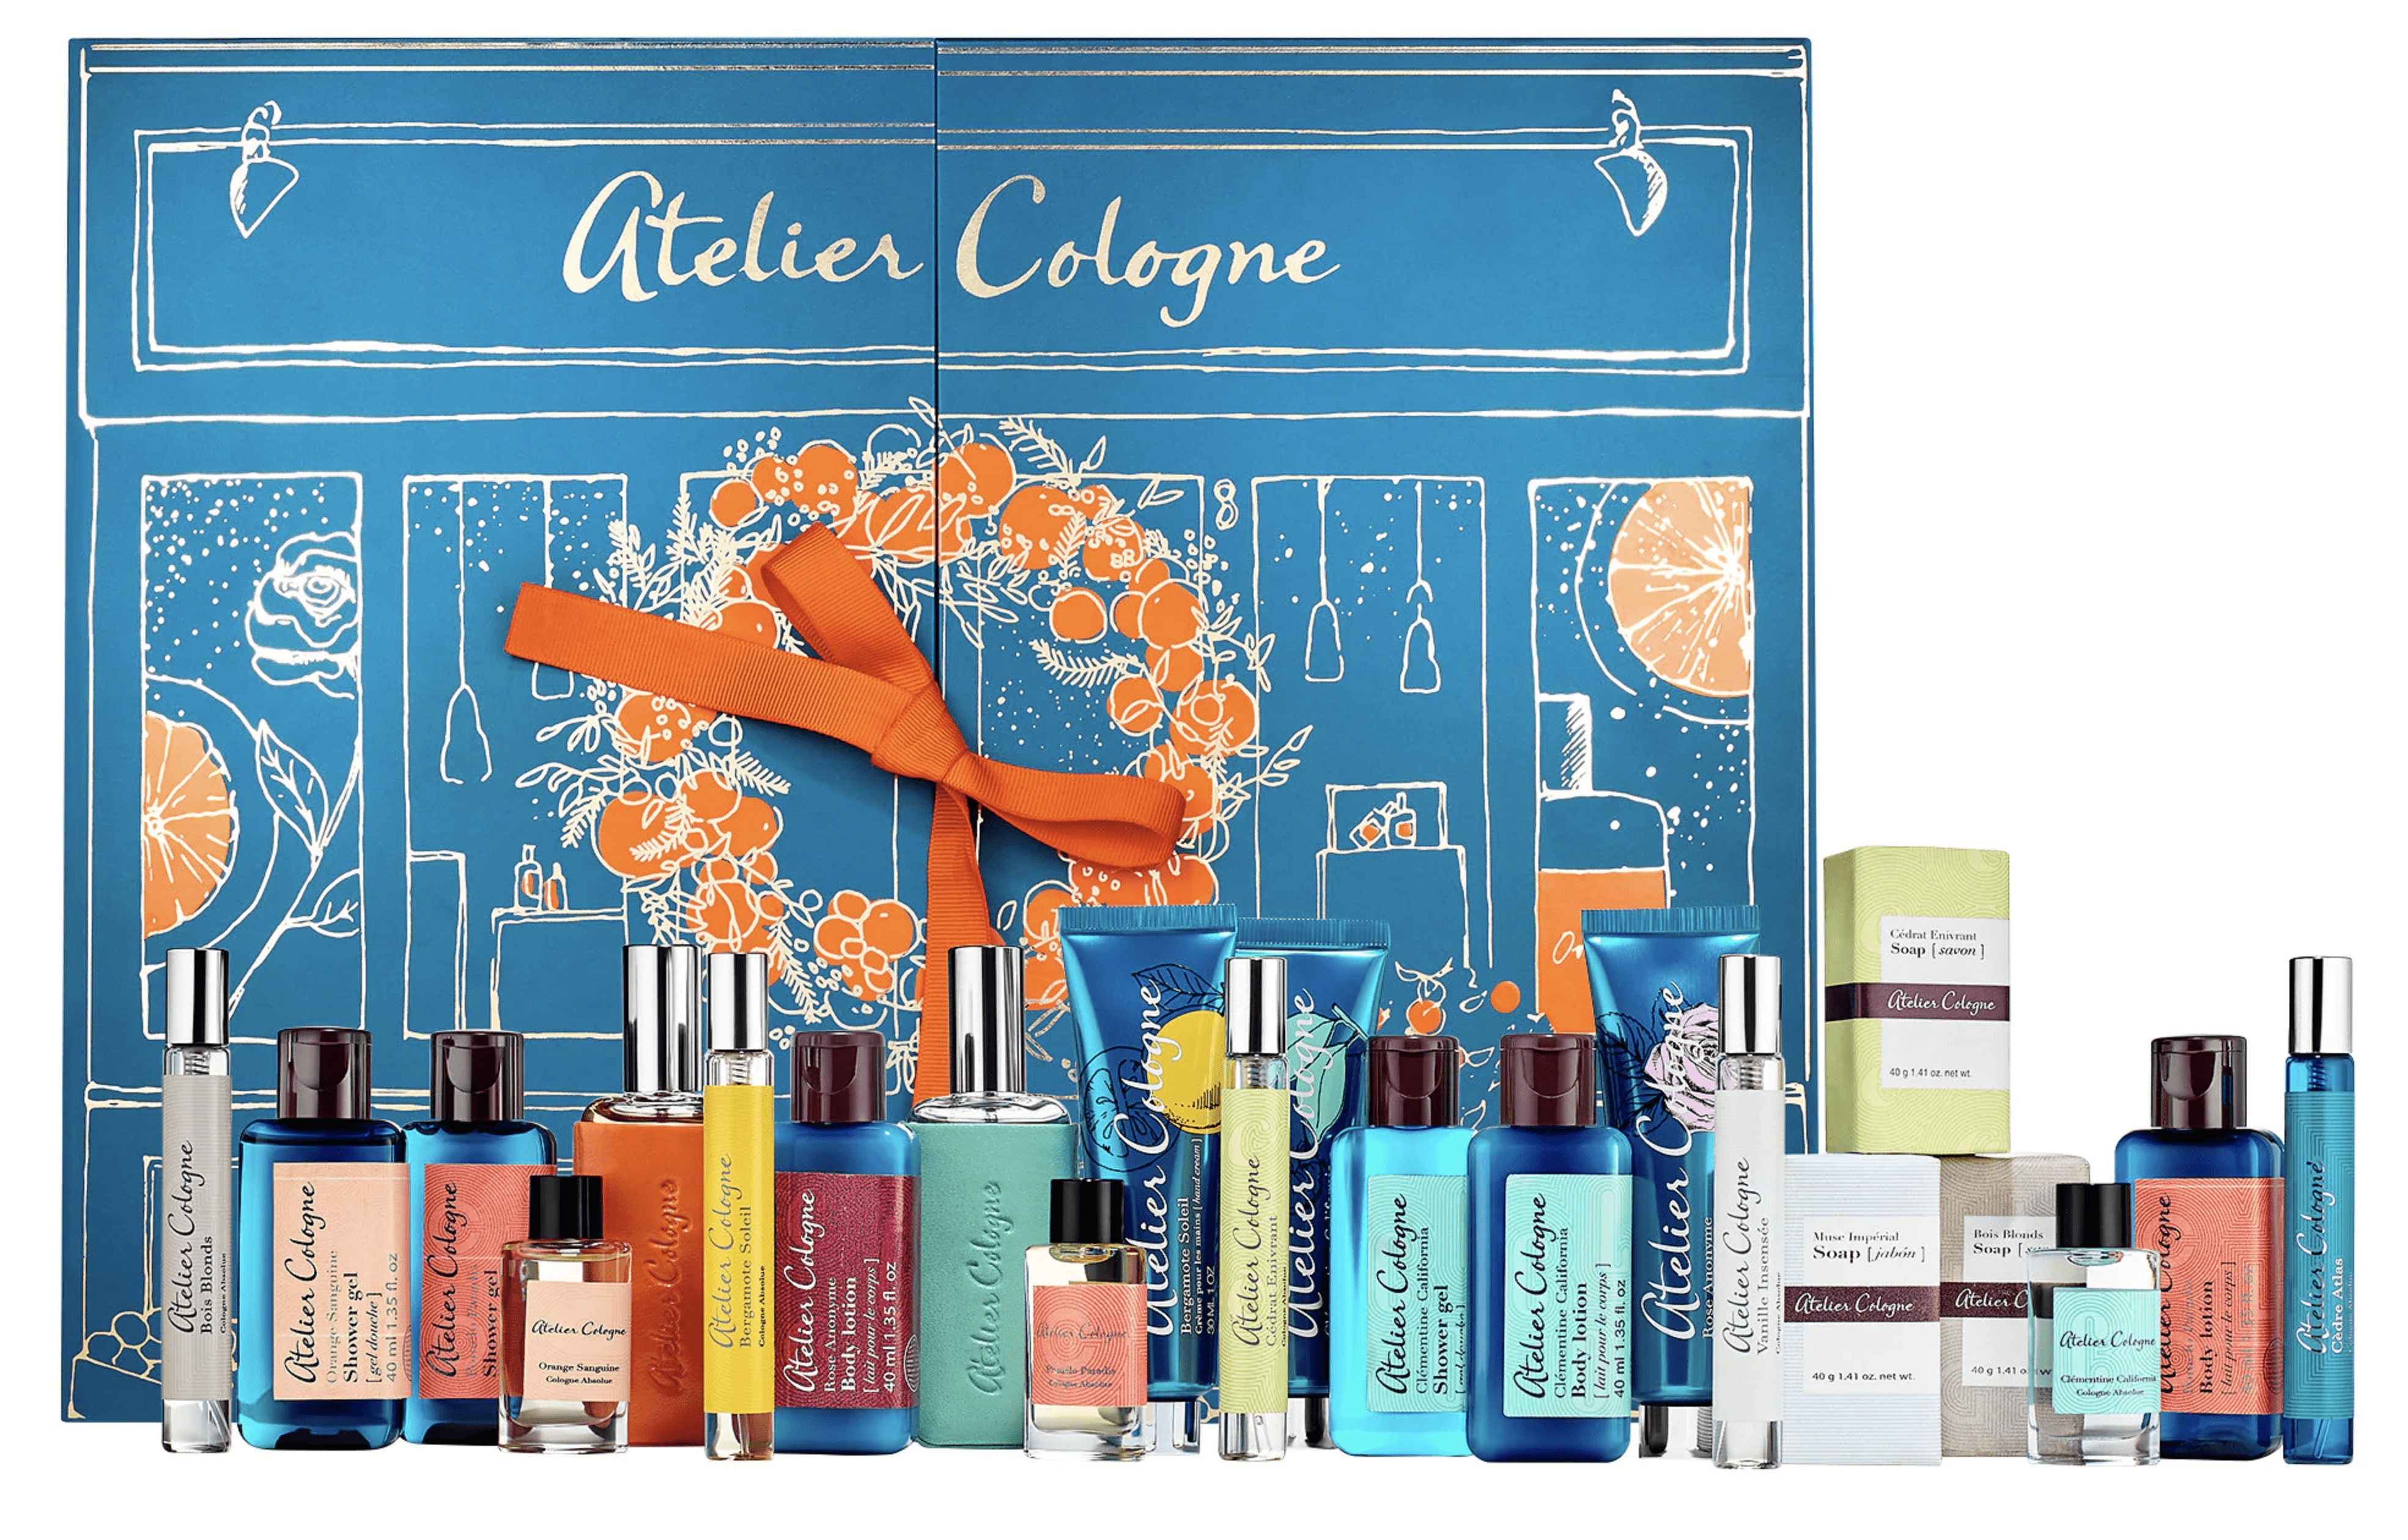 2018 Atelier Cologne Luxury Advent Calendar Available Now   Full